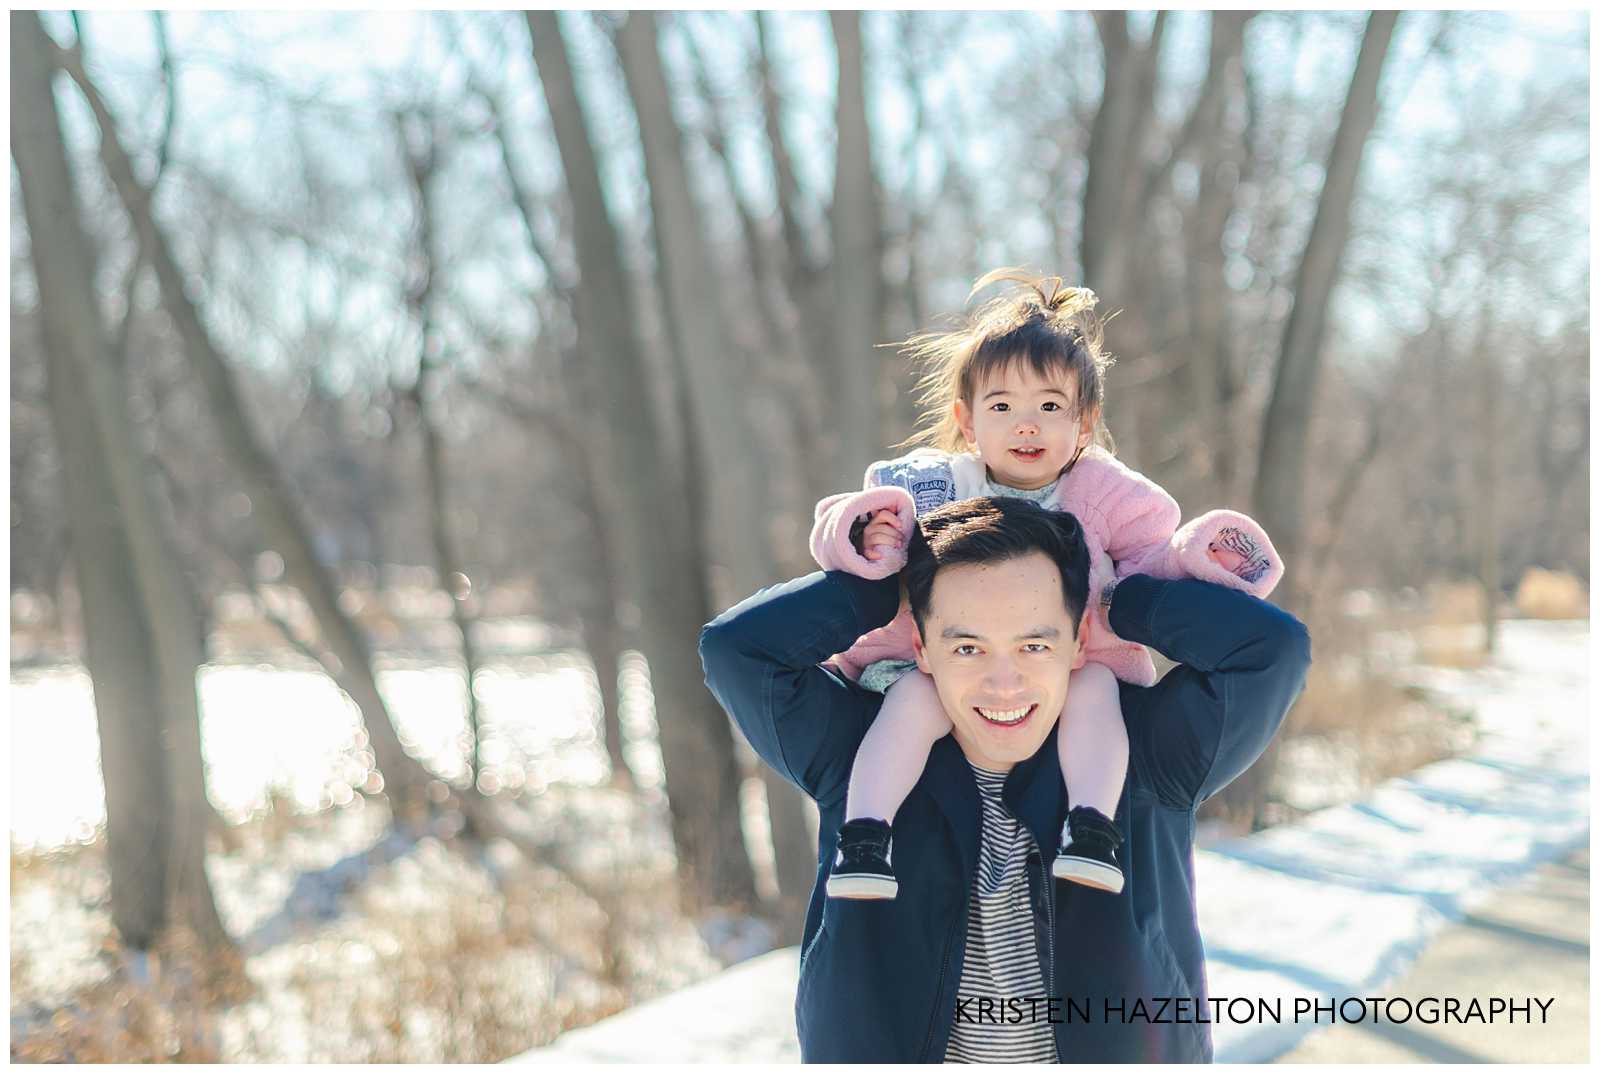 Dad bouncing toddler daughter on his shoulders at a Winter Family Photoshoot